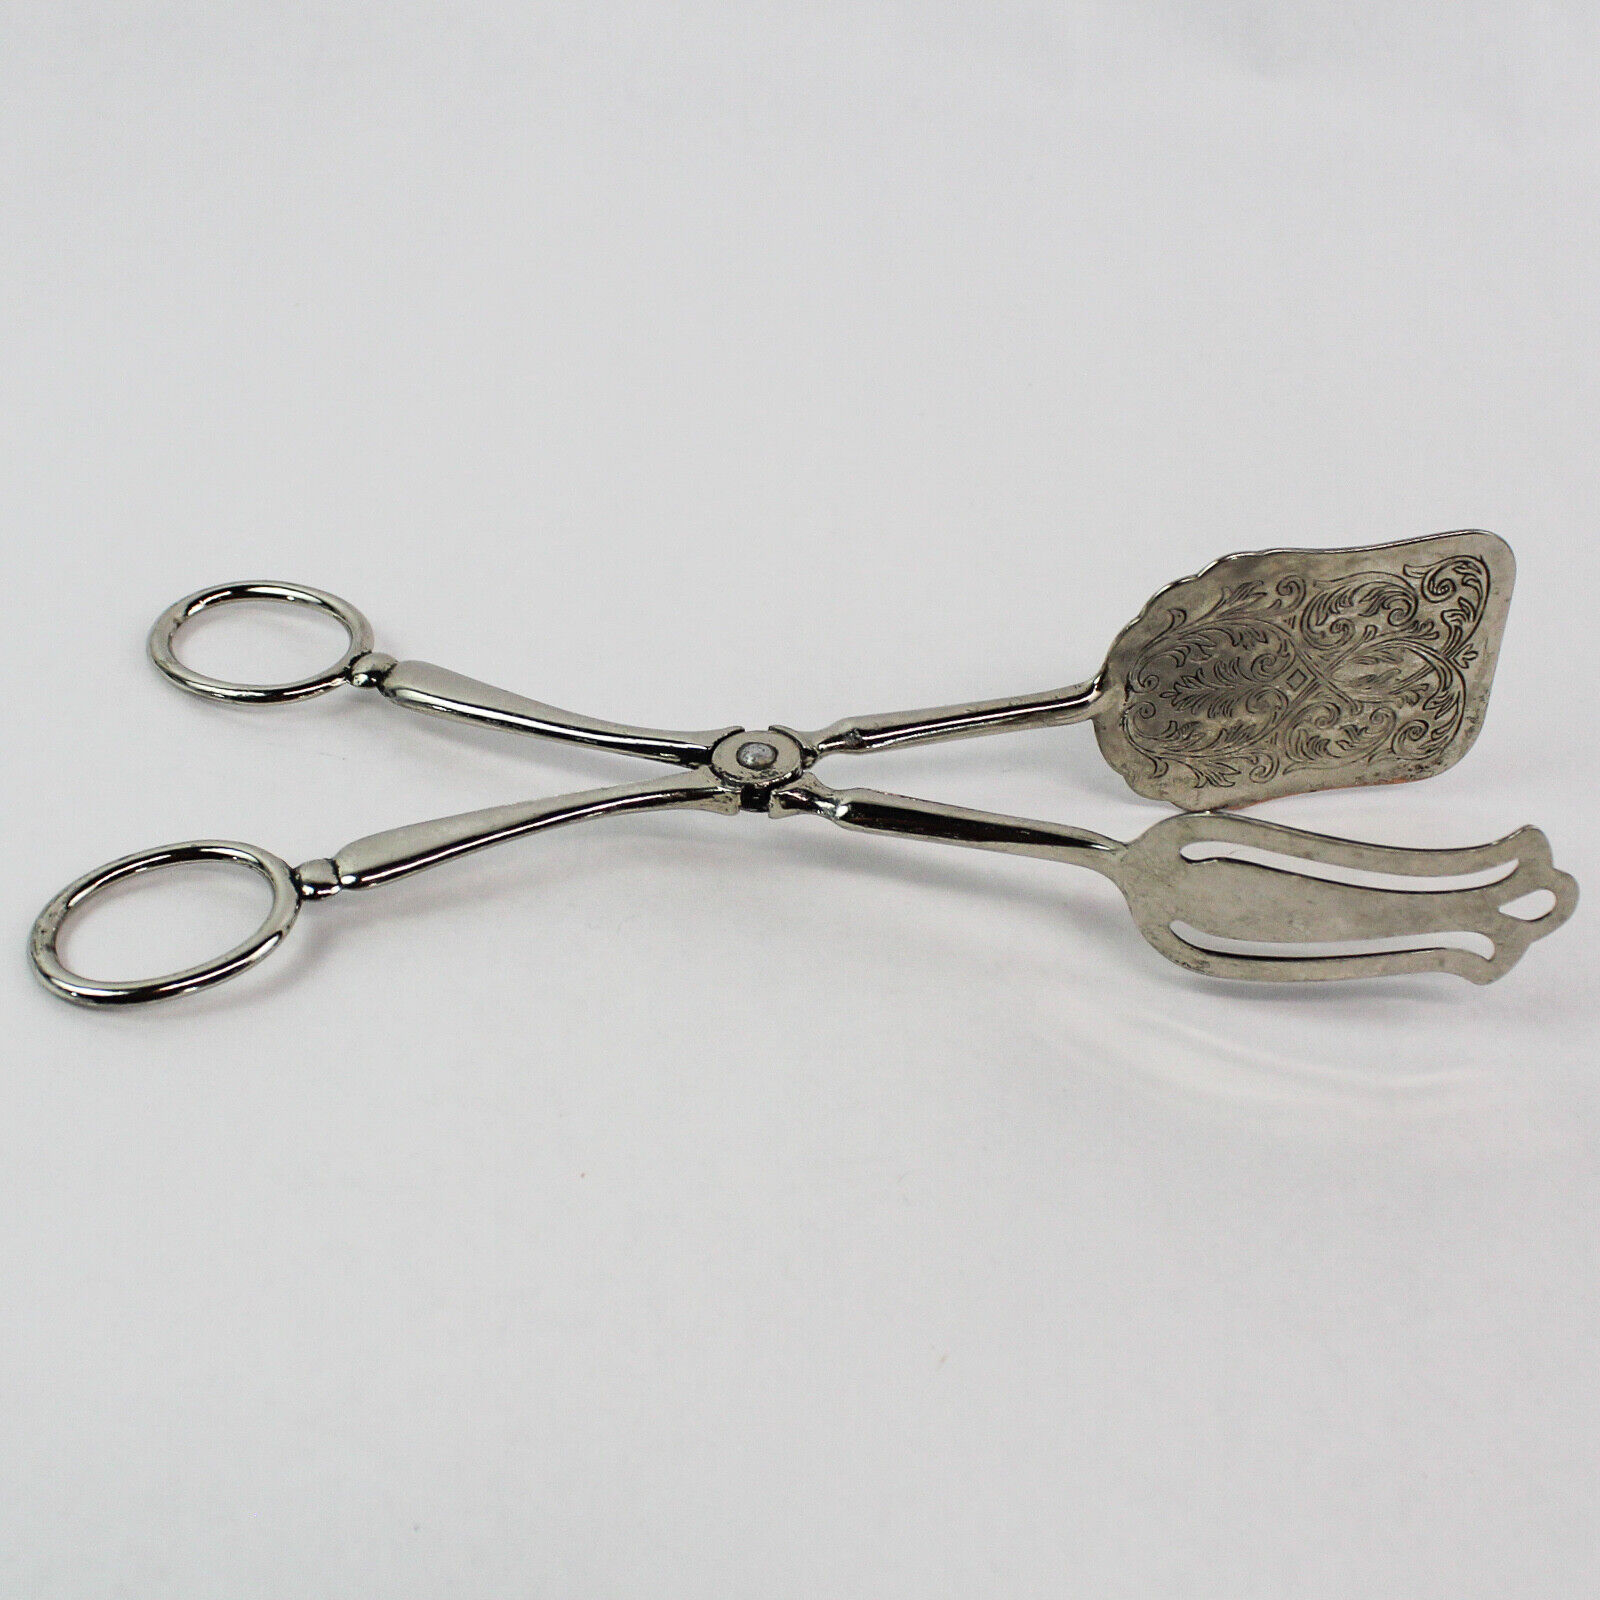 Vintage Silver Plated Pastry Salad Tongs Scissor Style Made In Italy E.P. Zinc